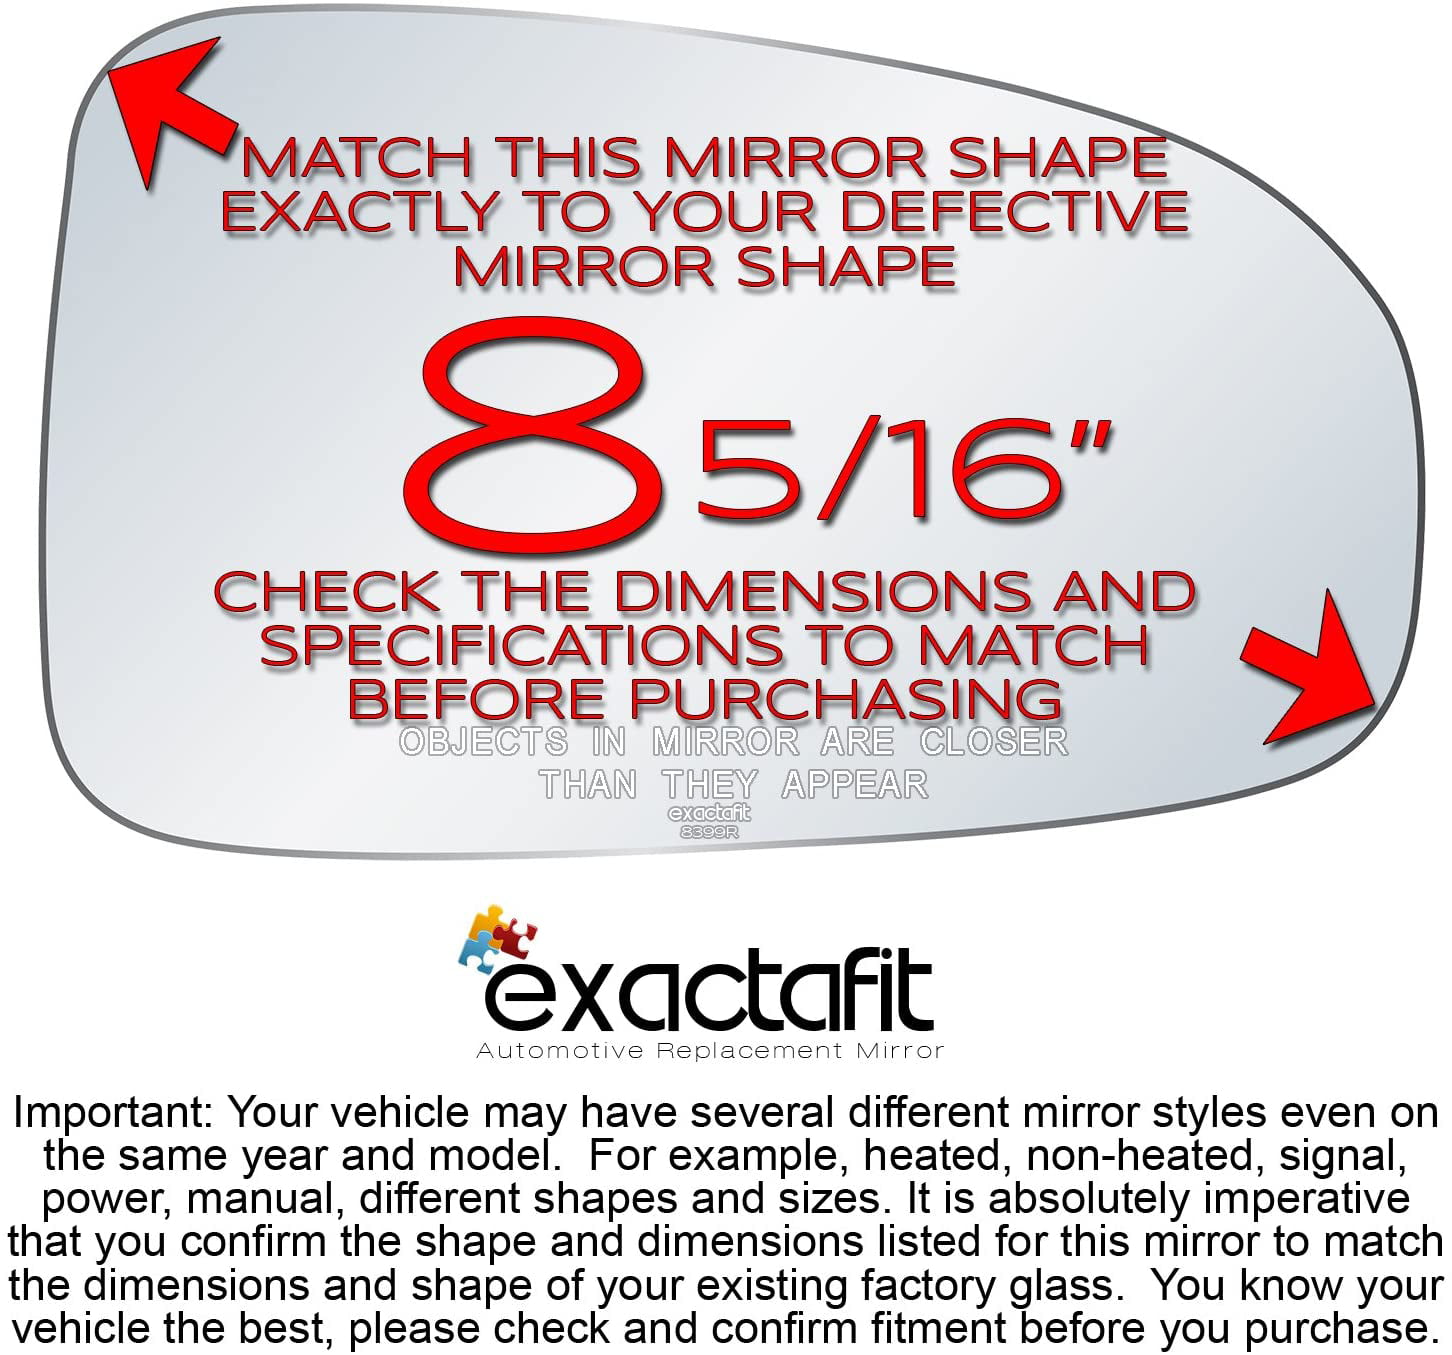 exactafit 8399R Replacement Passenger Right Side Mirror Glass Convex Lens fits 2000-2005 Chevy Impala by Rugged TUFF 